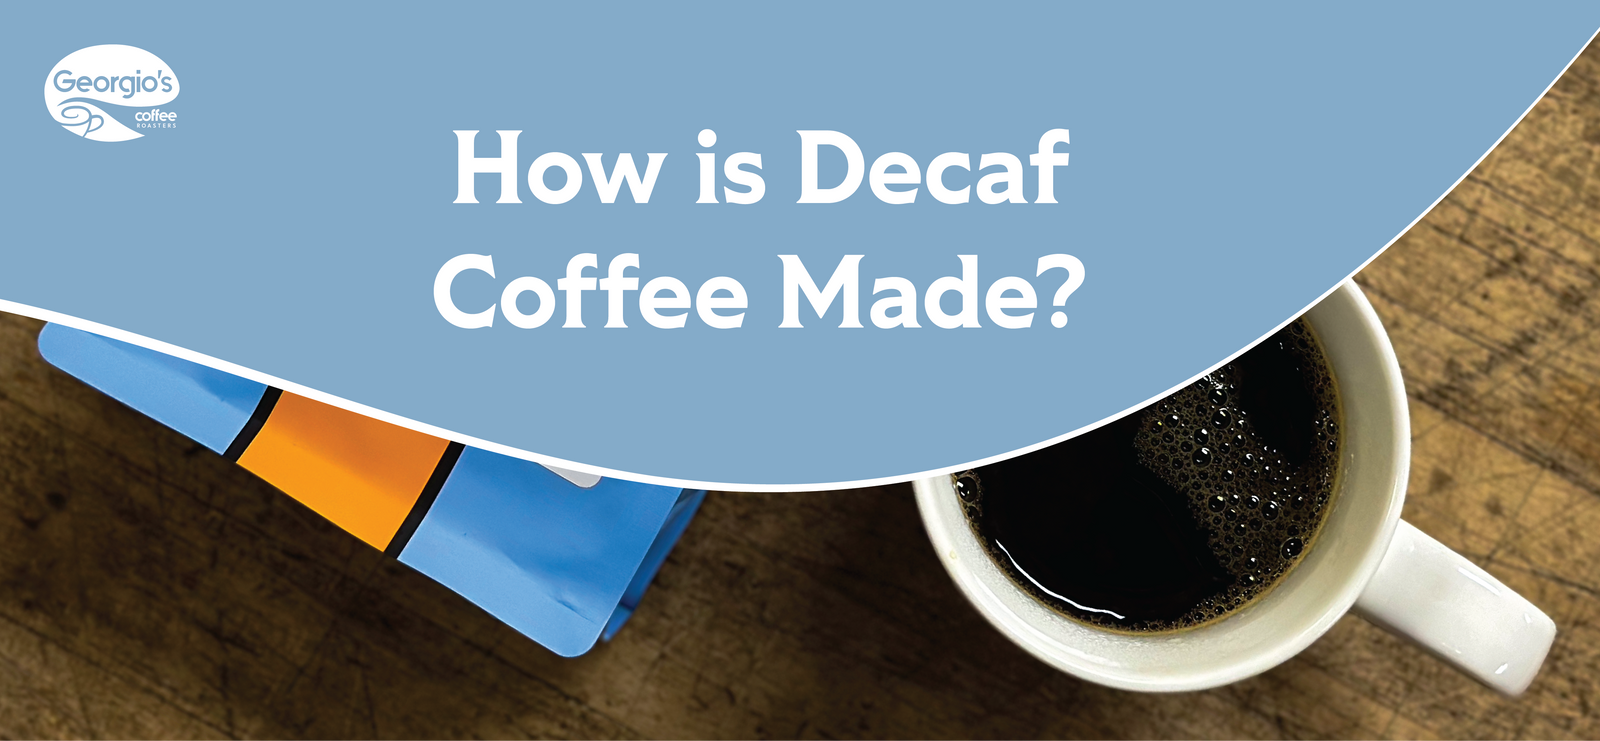 how is decaf coffee made? How do you make decaf coffee?